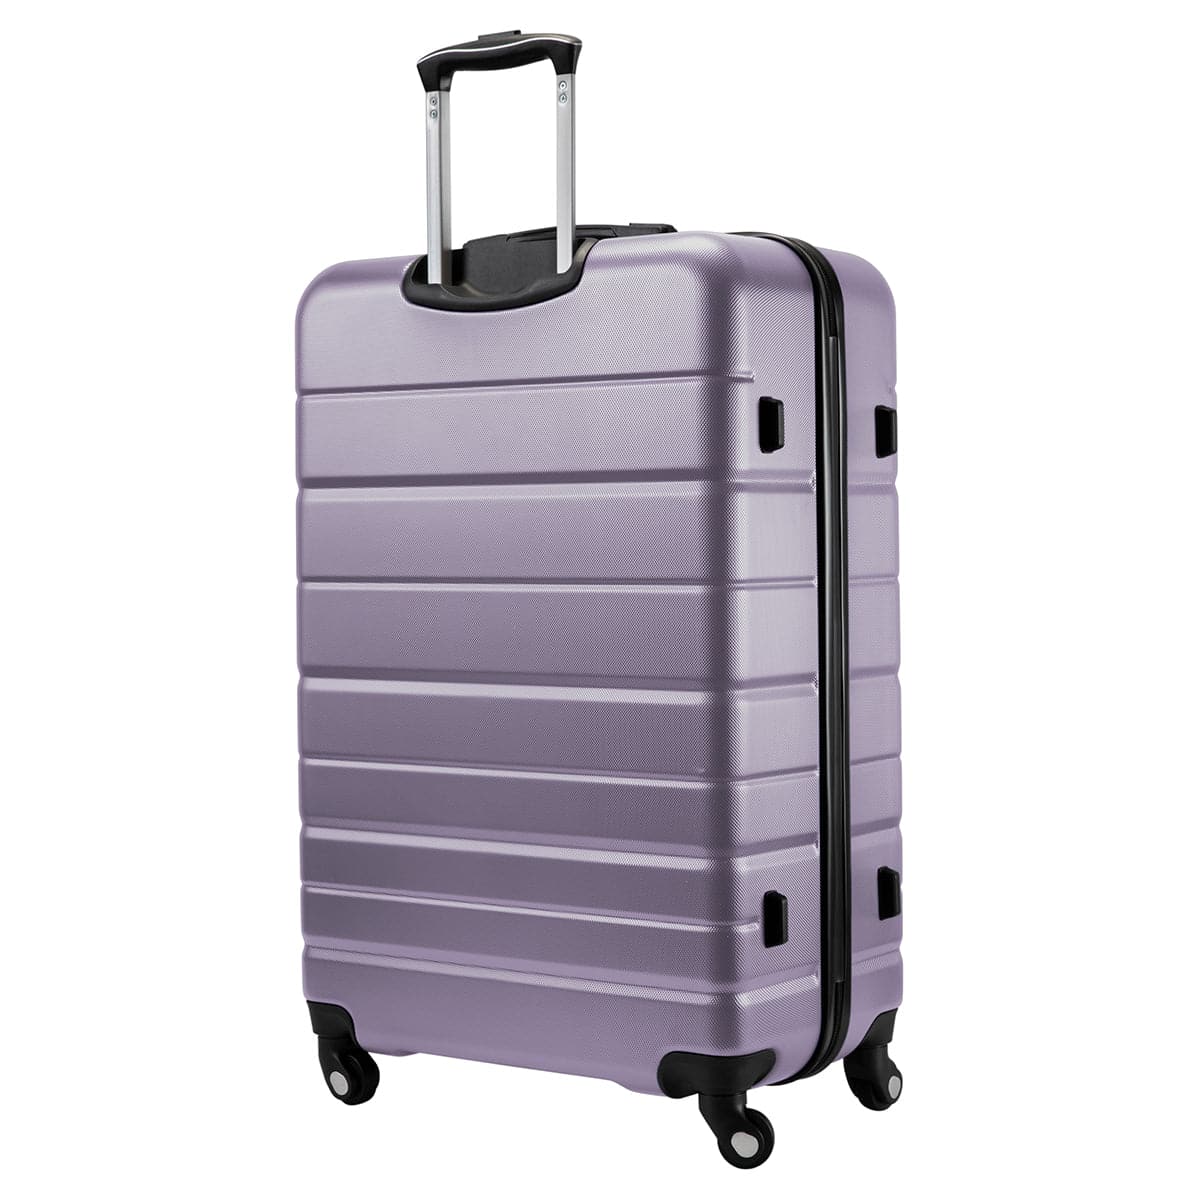 Skyway EPIC 2.0 Hardside Large Check-In Luggage